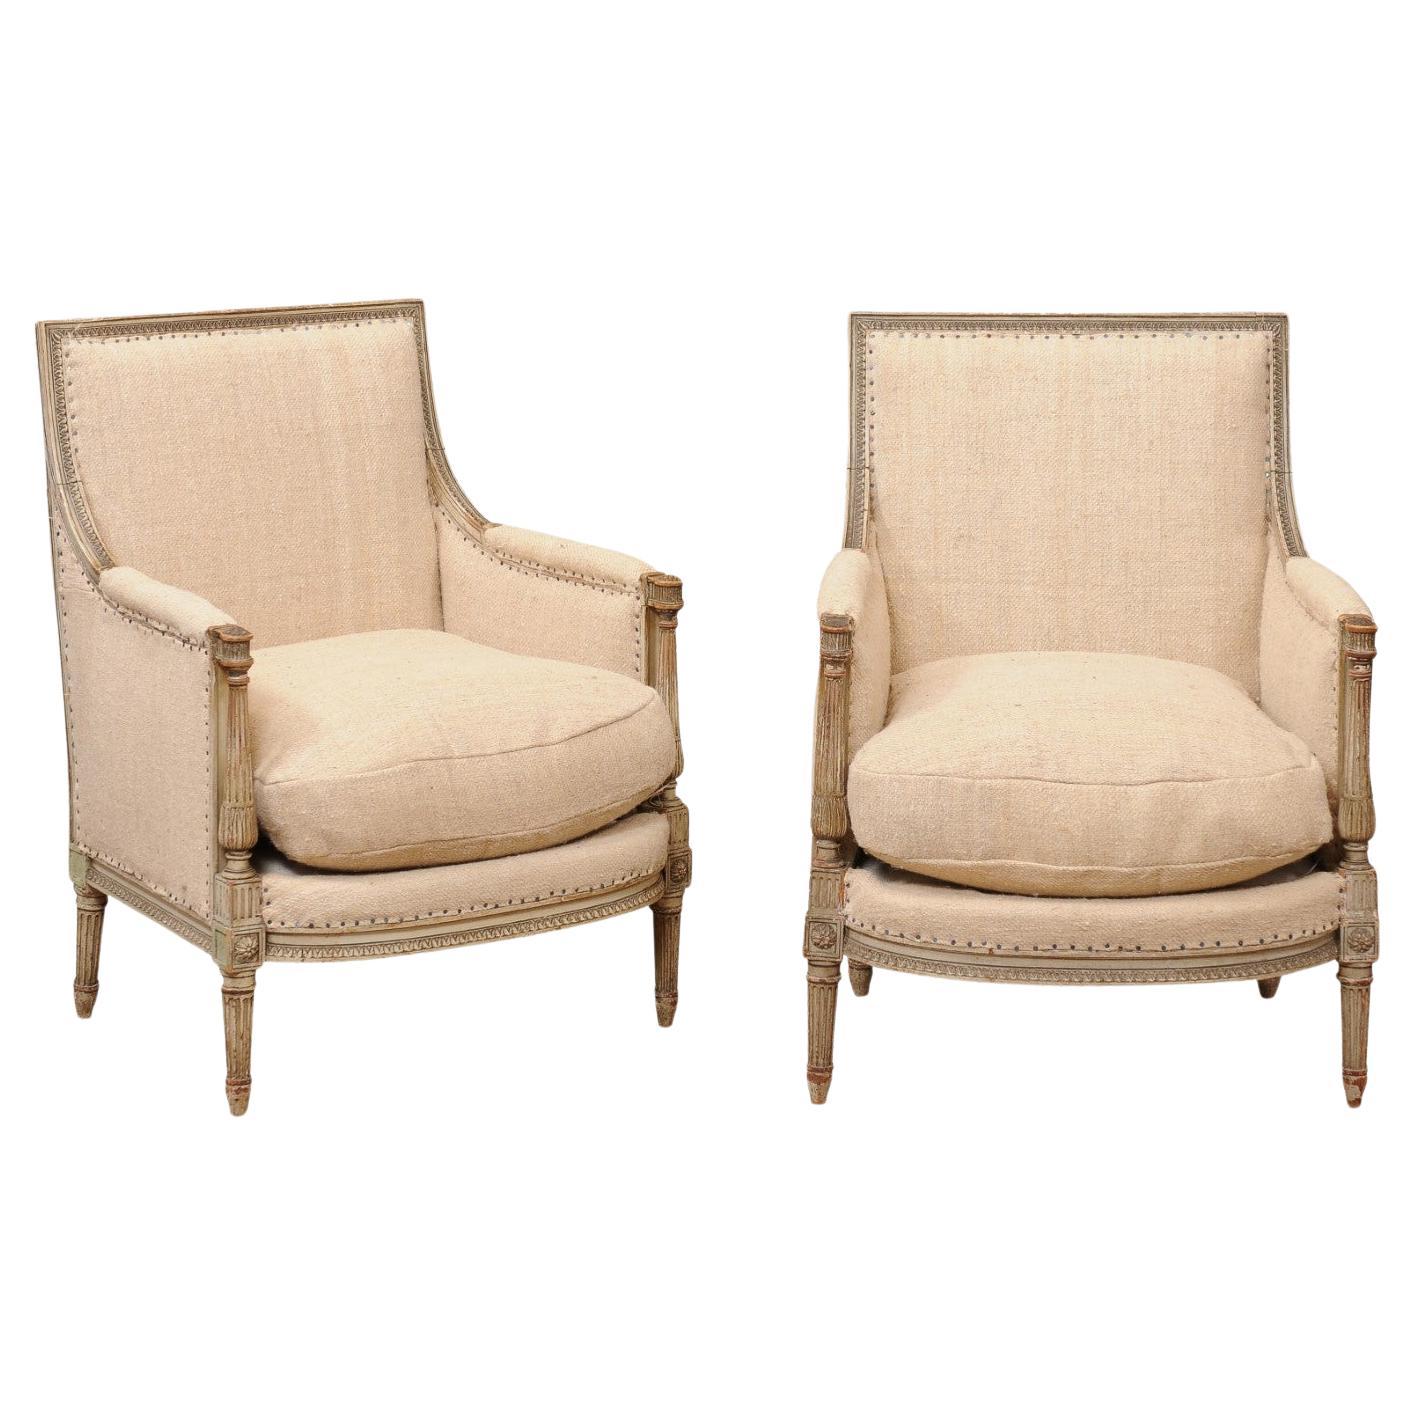 Pair of French Louis XVI Style Painted Bergeres with Linen Upholstery For Sale